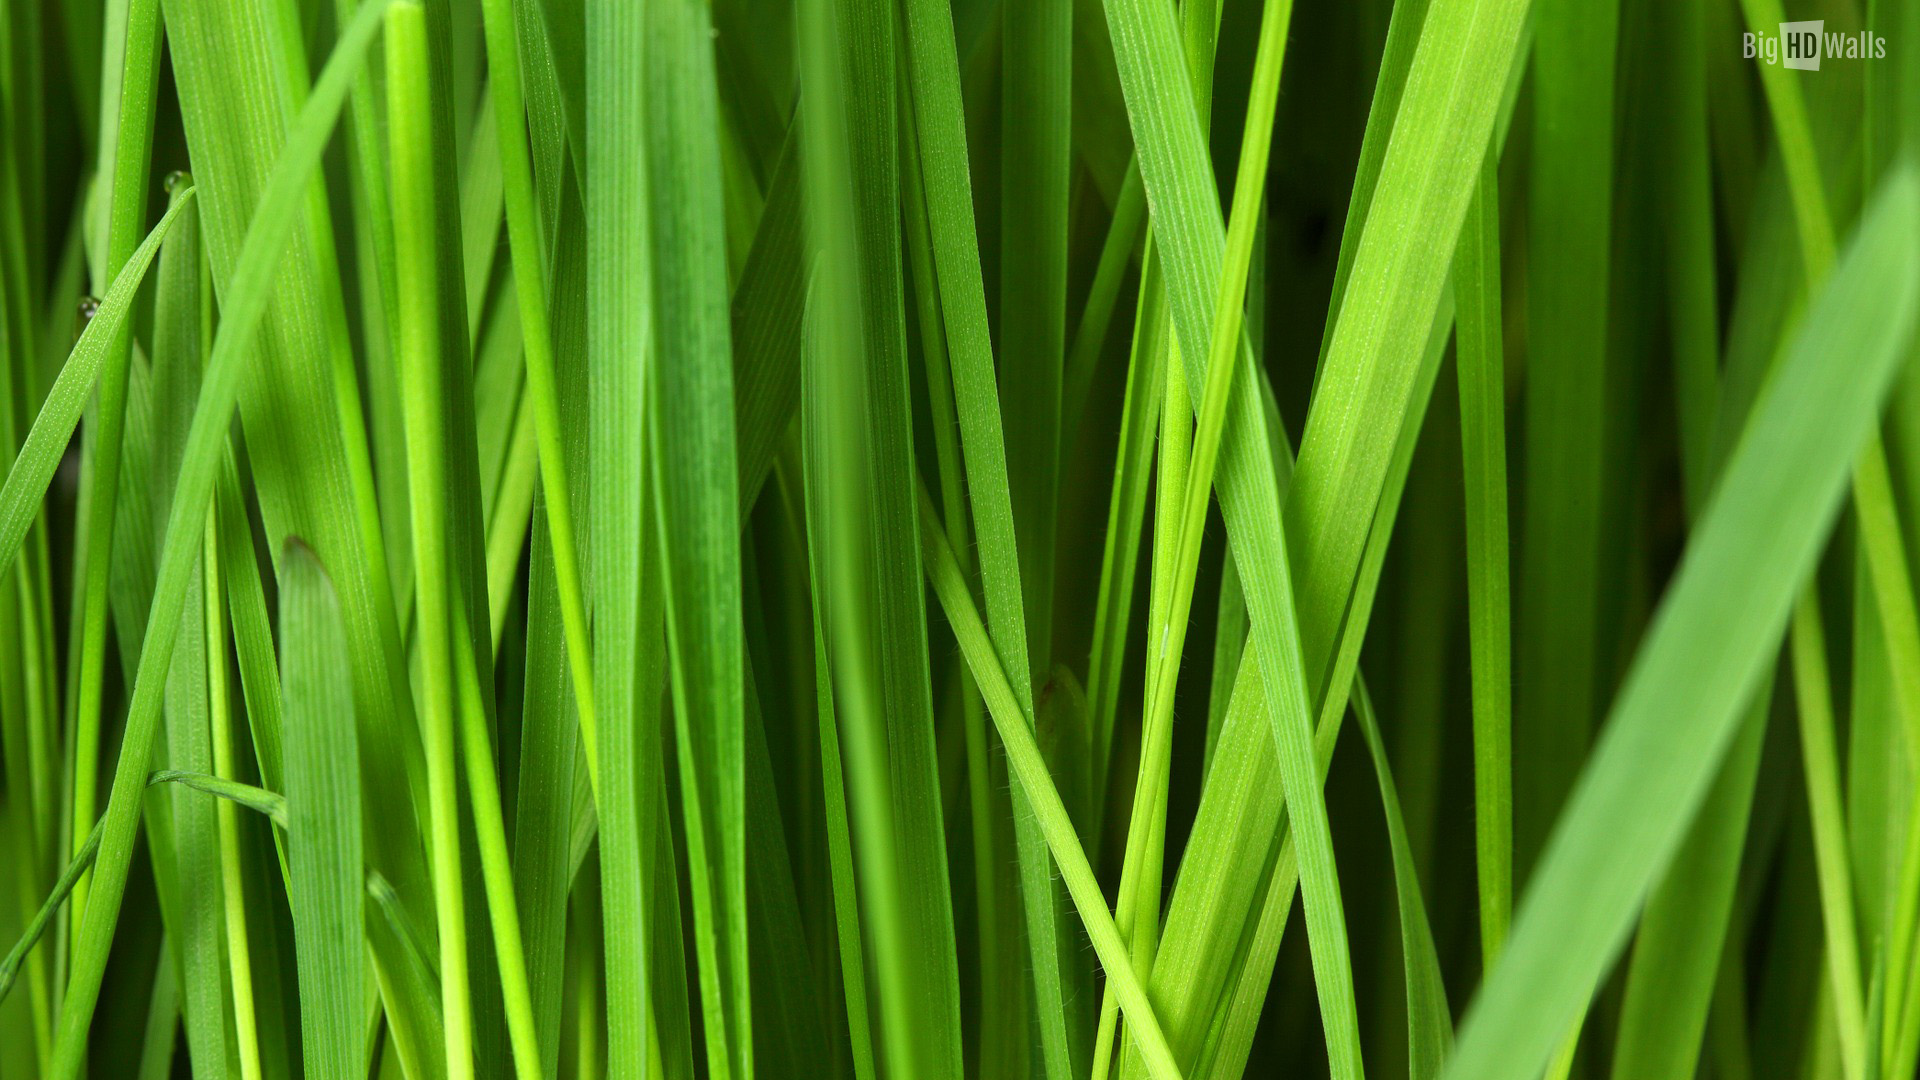 Green Leaves HD Wallpaper For Your Desktop Click On Image To Enlarge